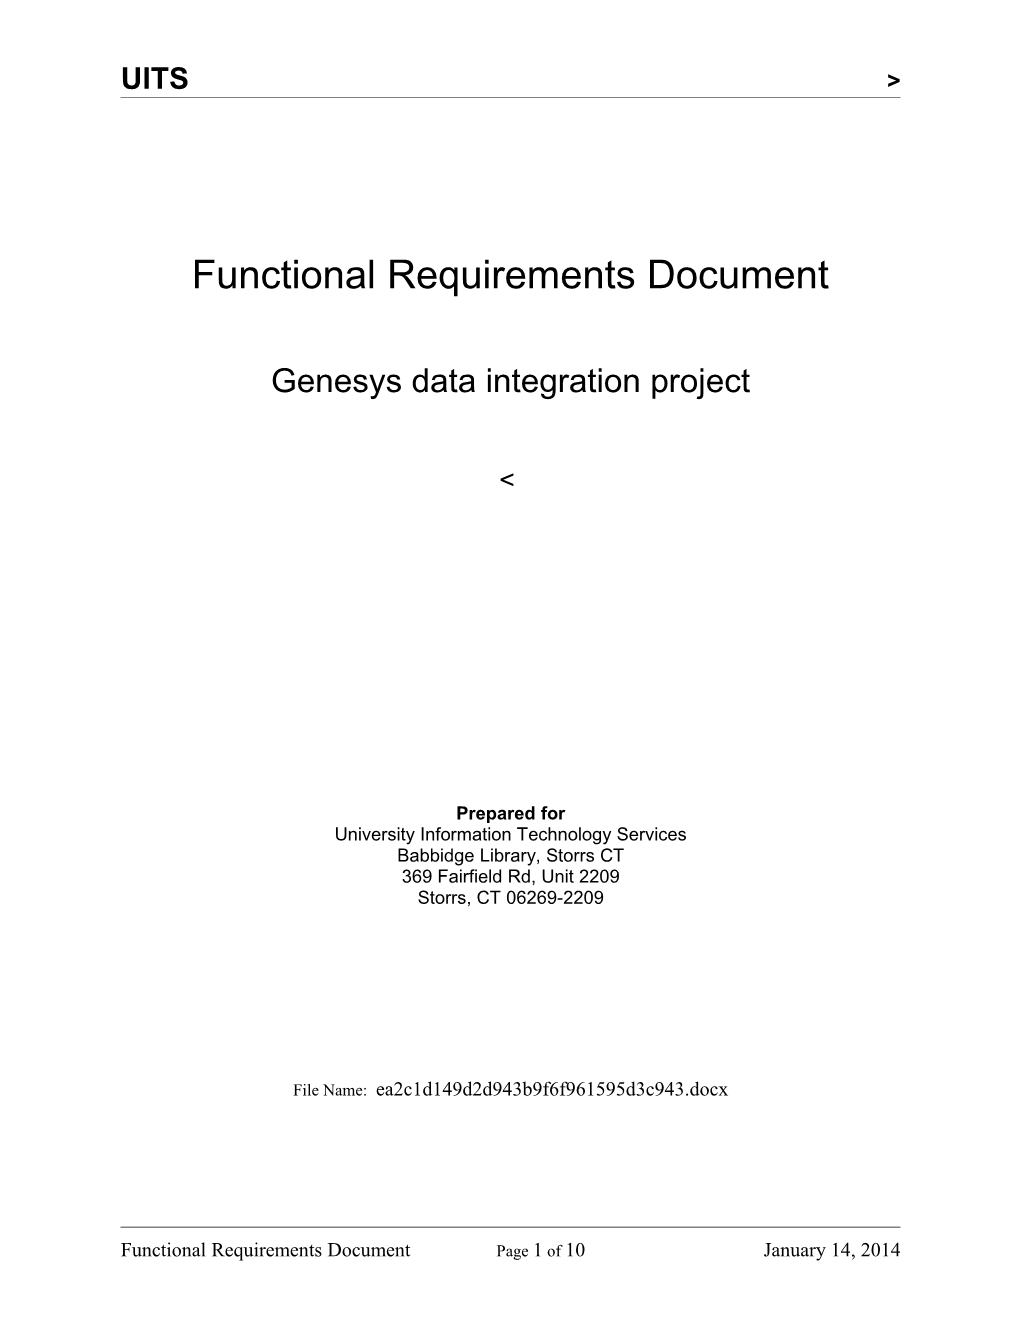 Functional Requirements Document